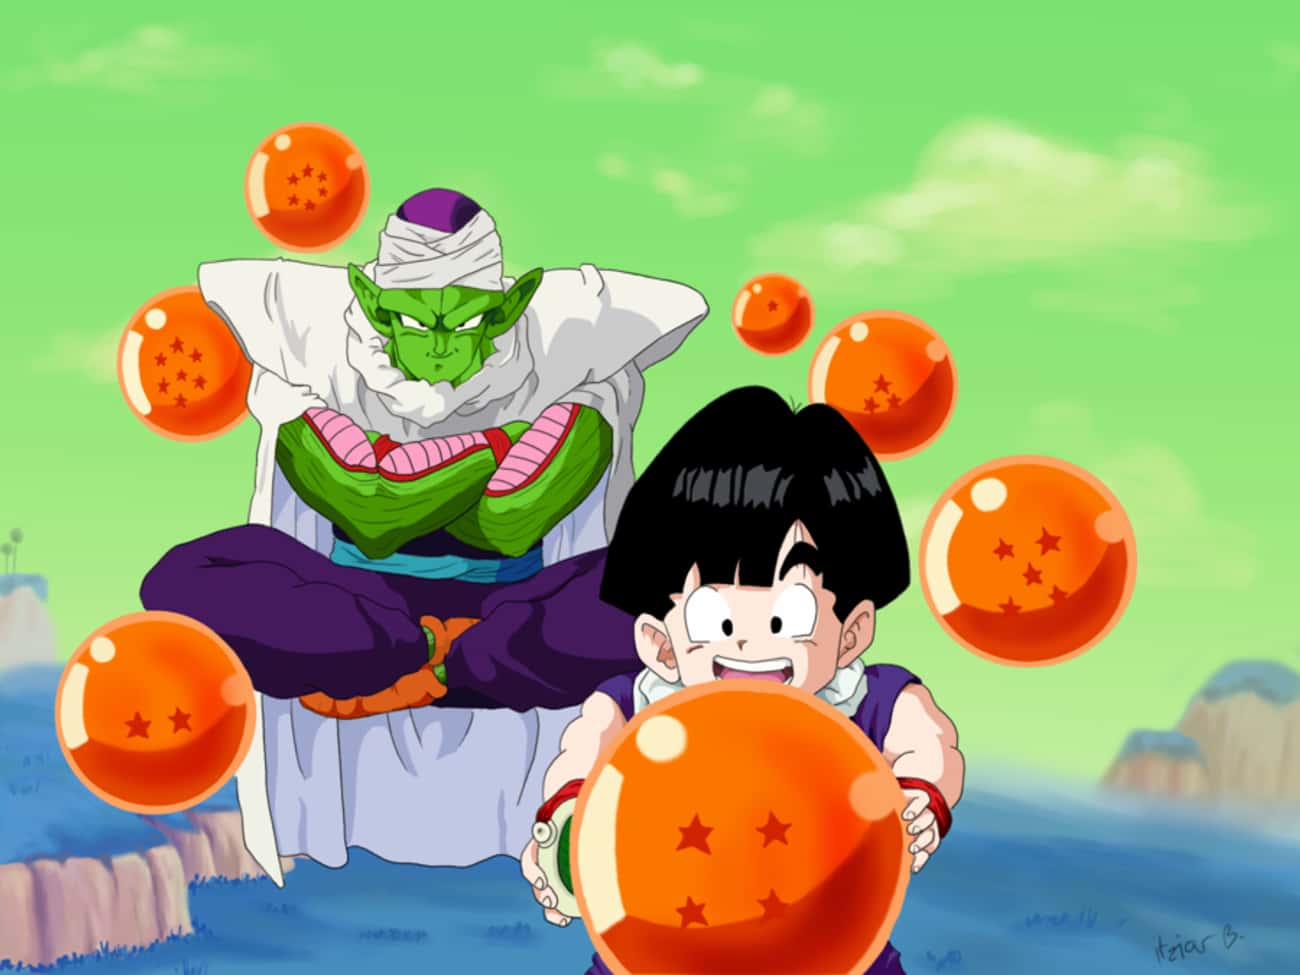 Piccolo and Gohan are Closer in Age Than They Seem